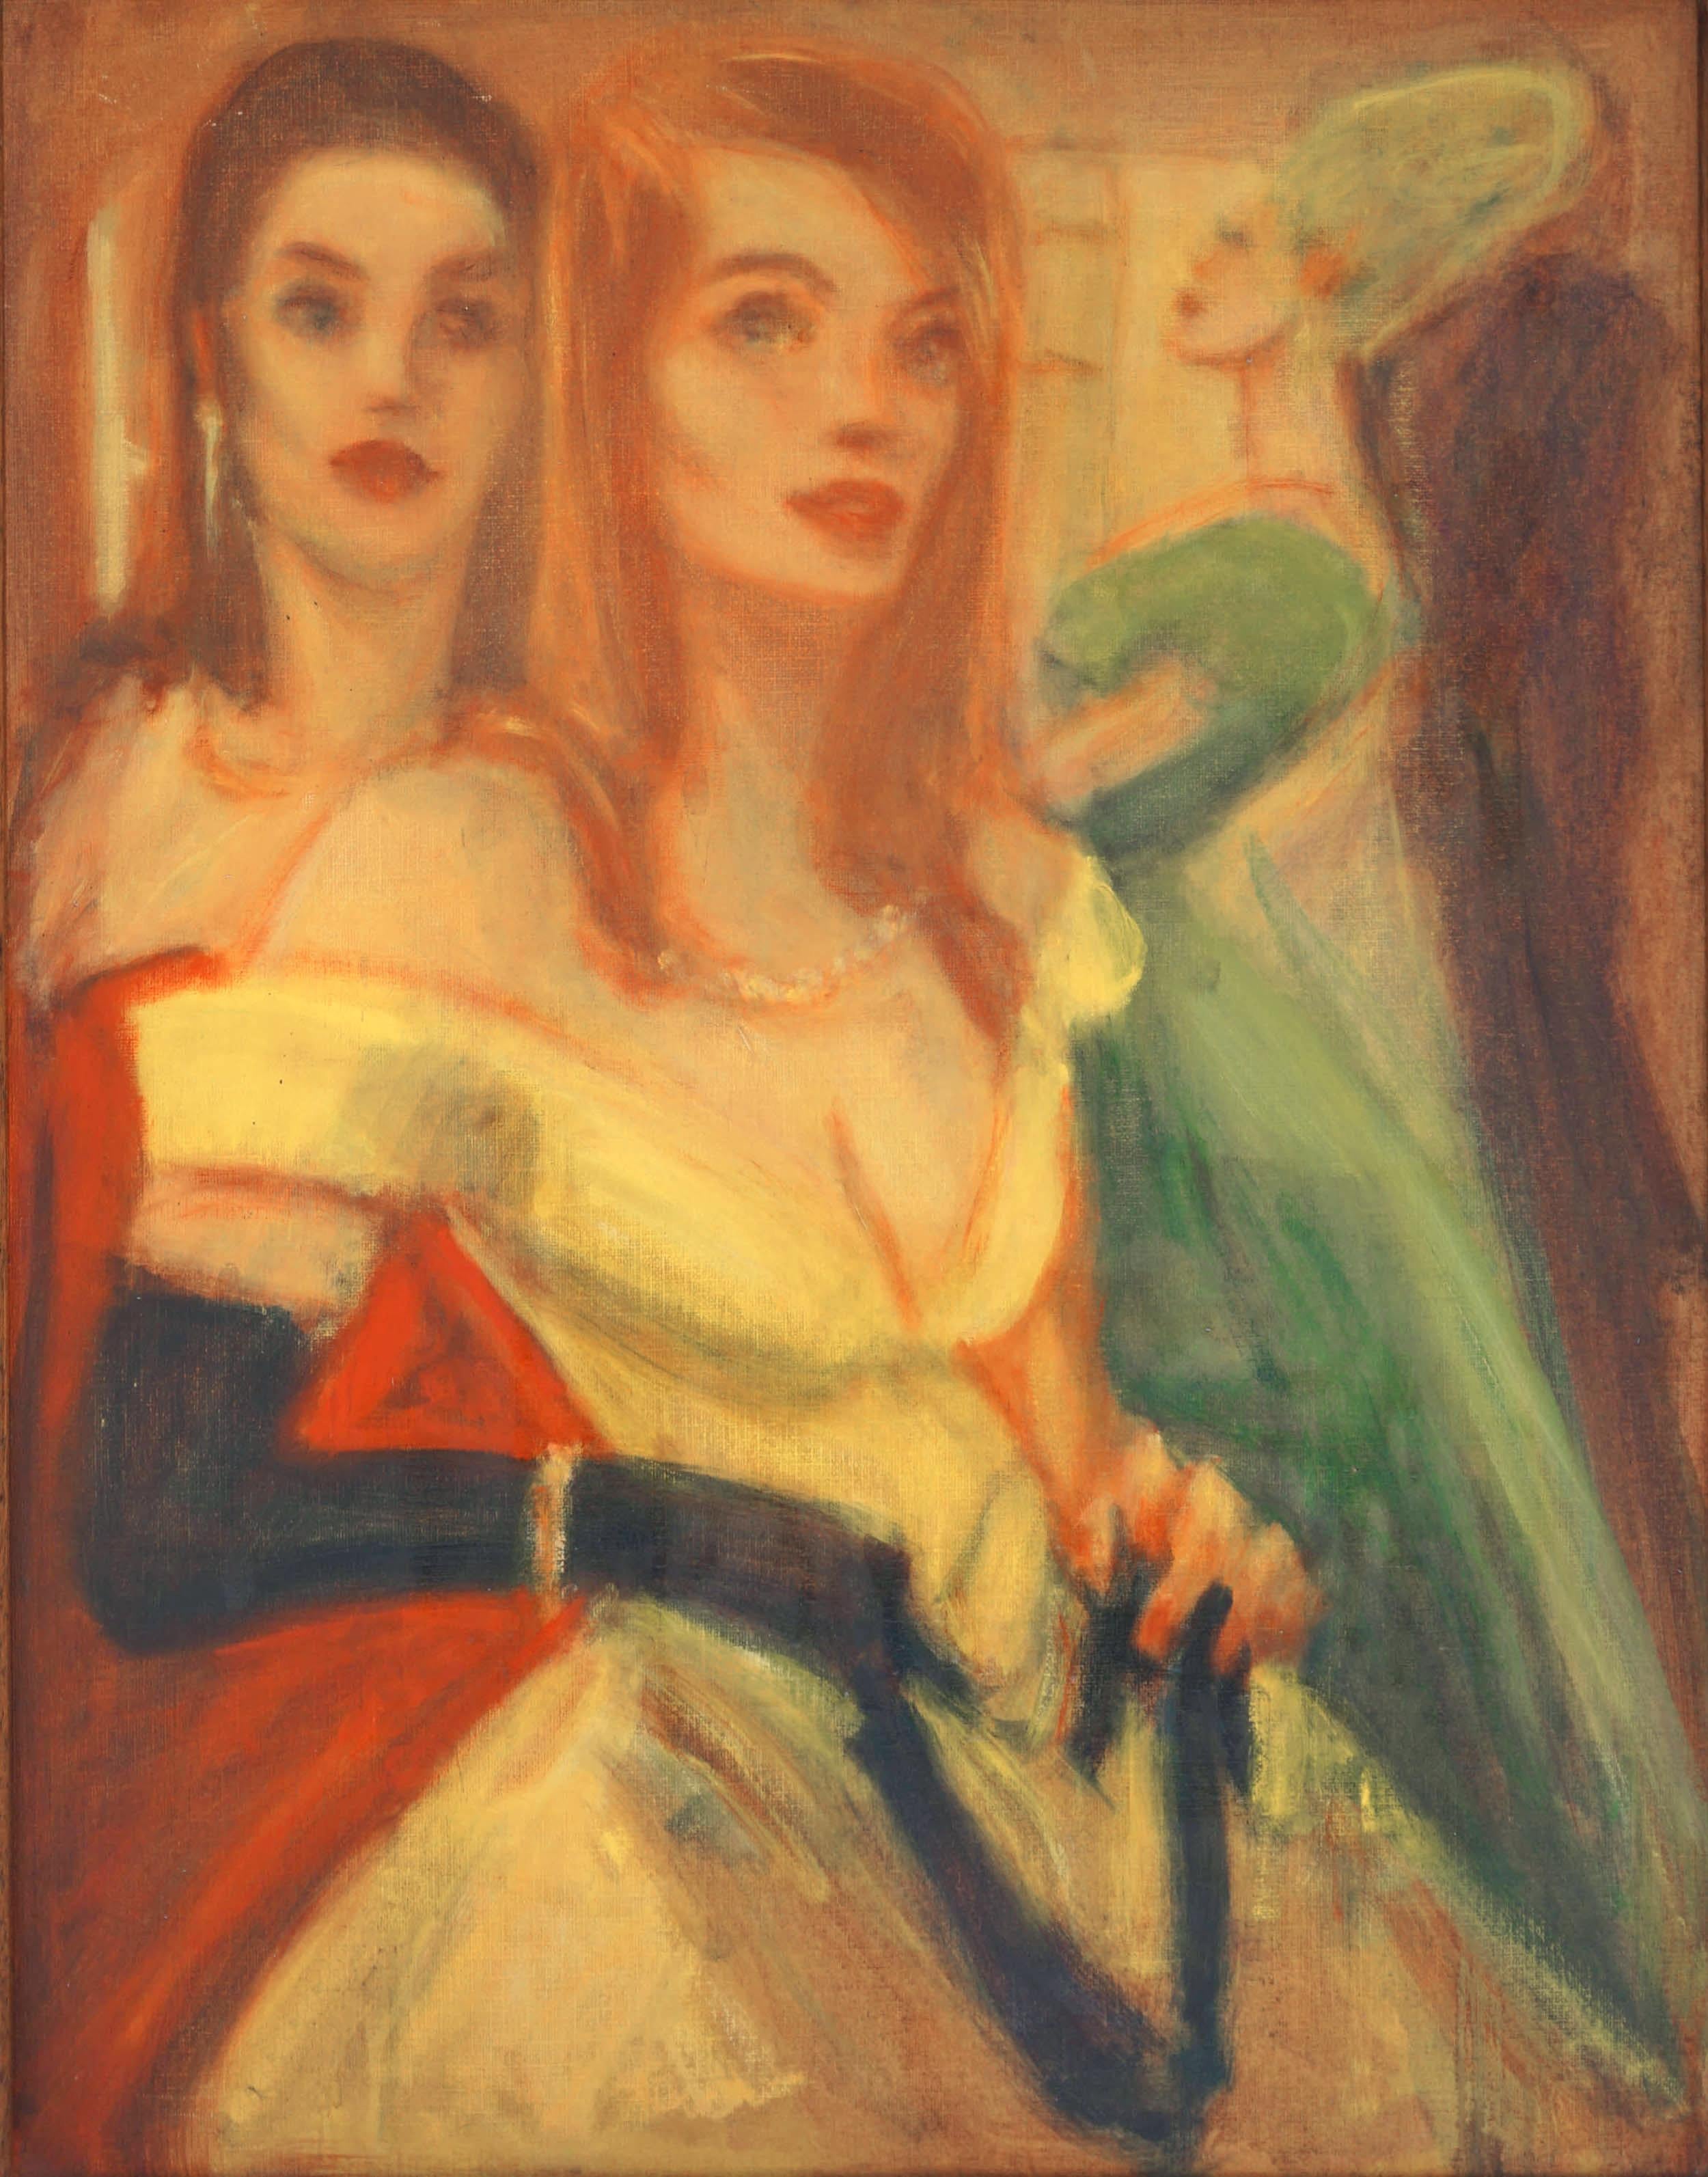 Pulp Art Figurative, Women at Party in Evening Dresses with Black Gloves 2 sided - Painting by Unknown